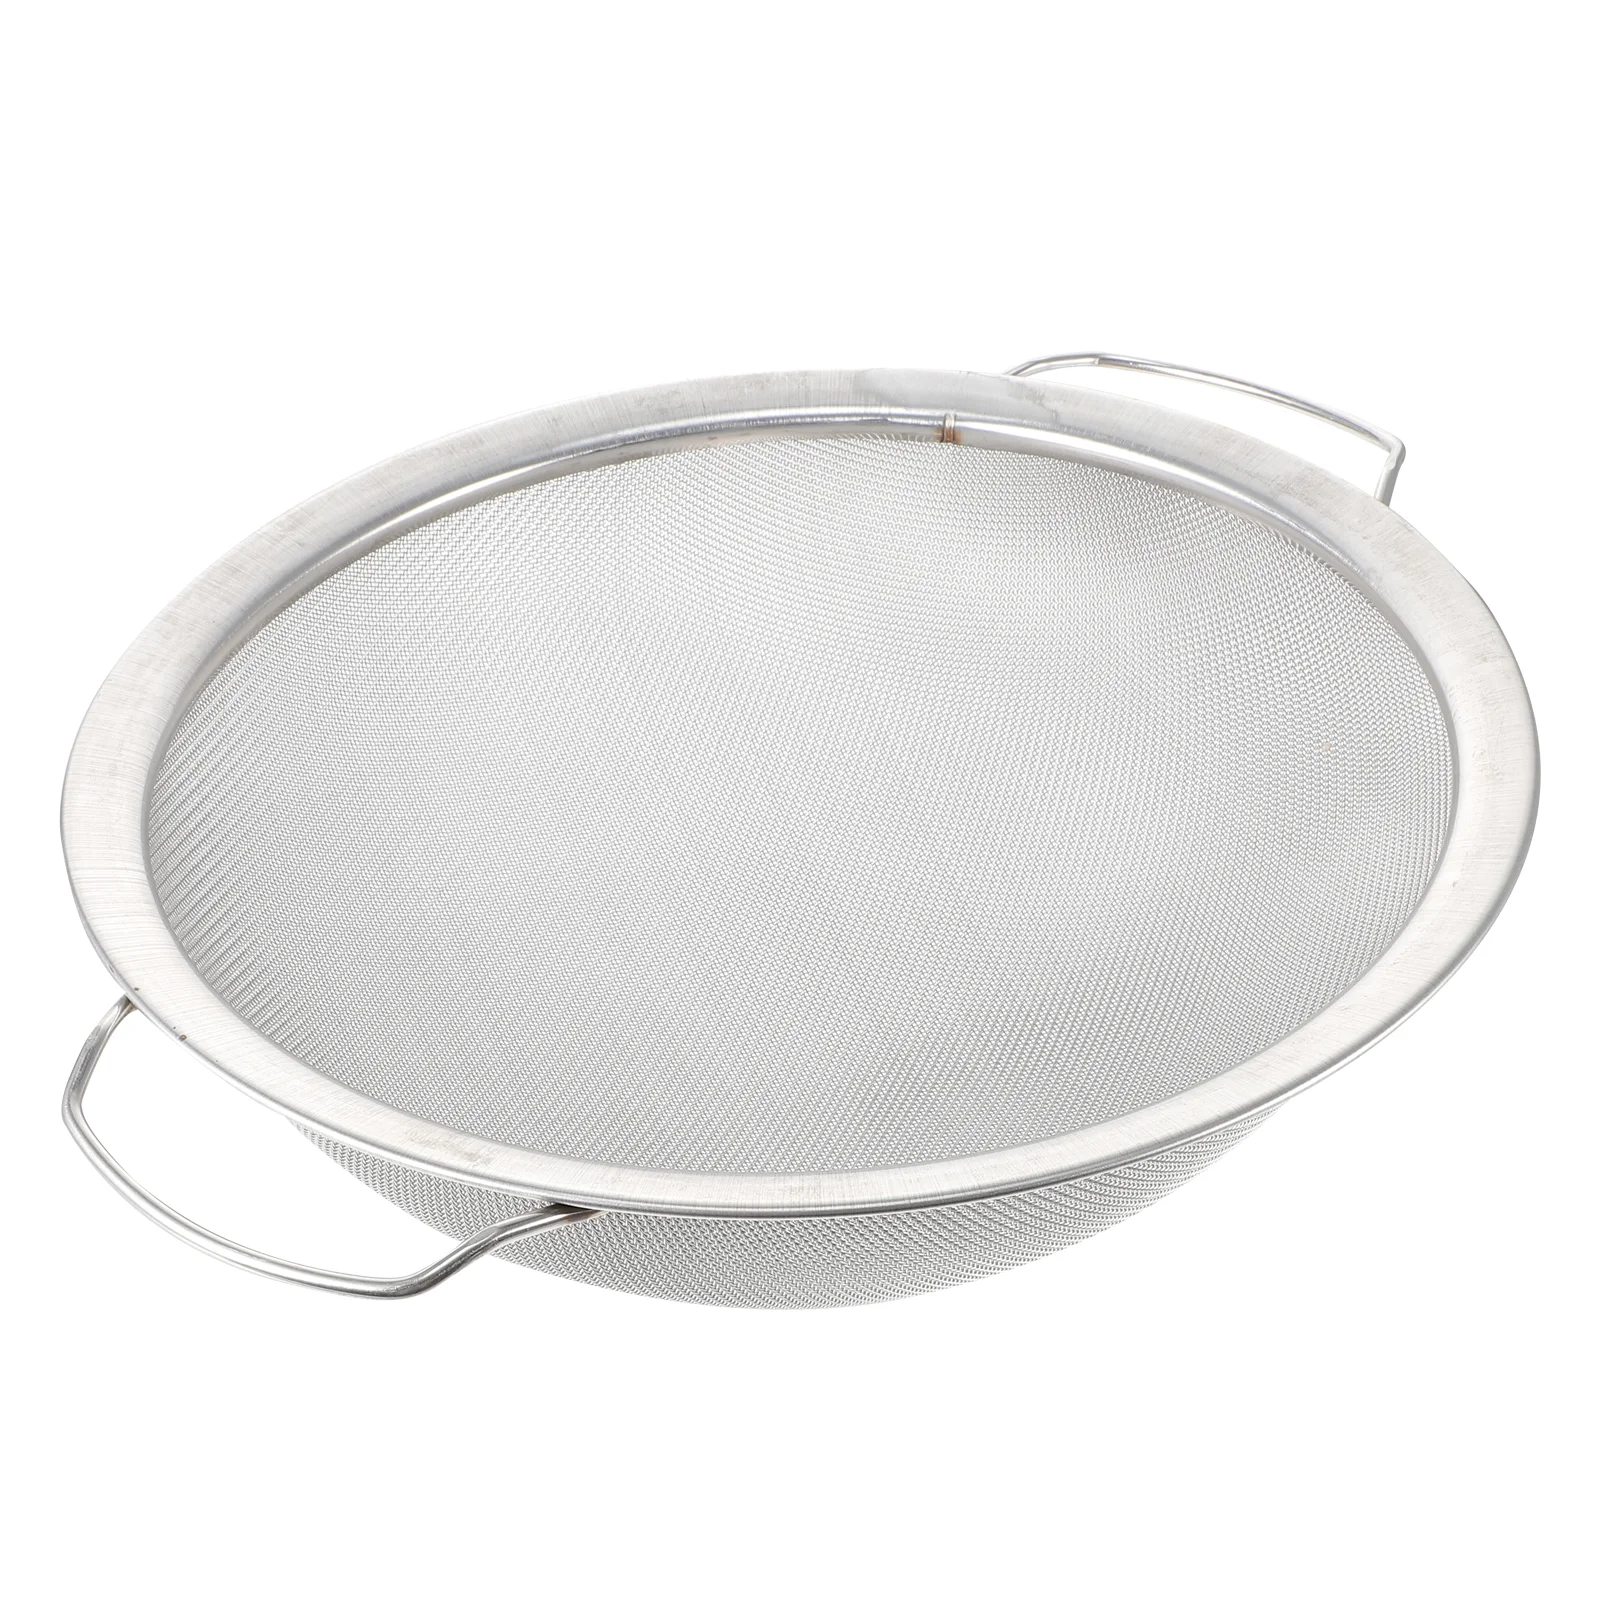 

Paint Strainer Replacement Paint Filter Stainless Steel Net Strainer Supply